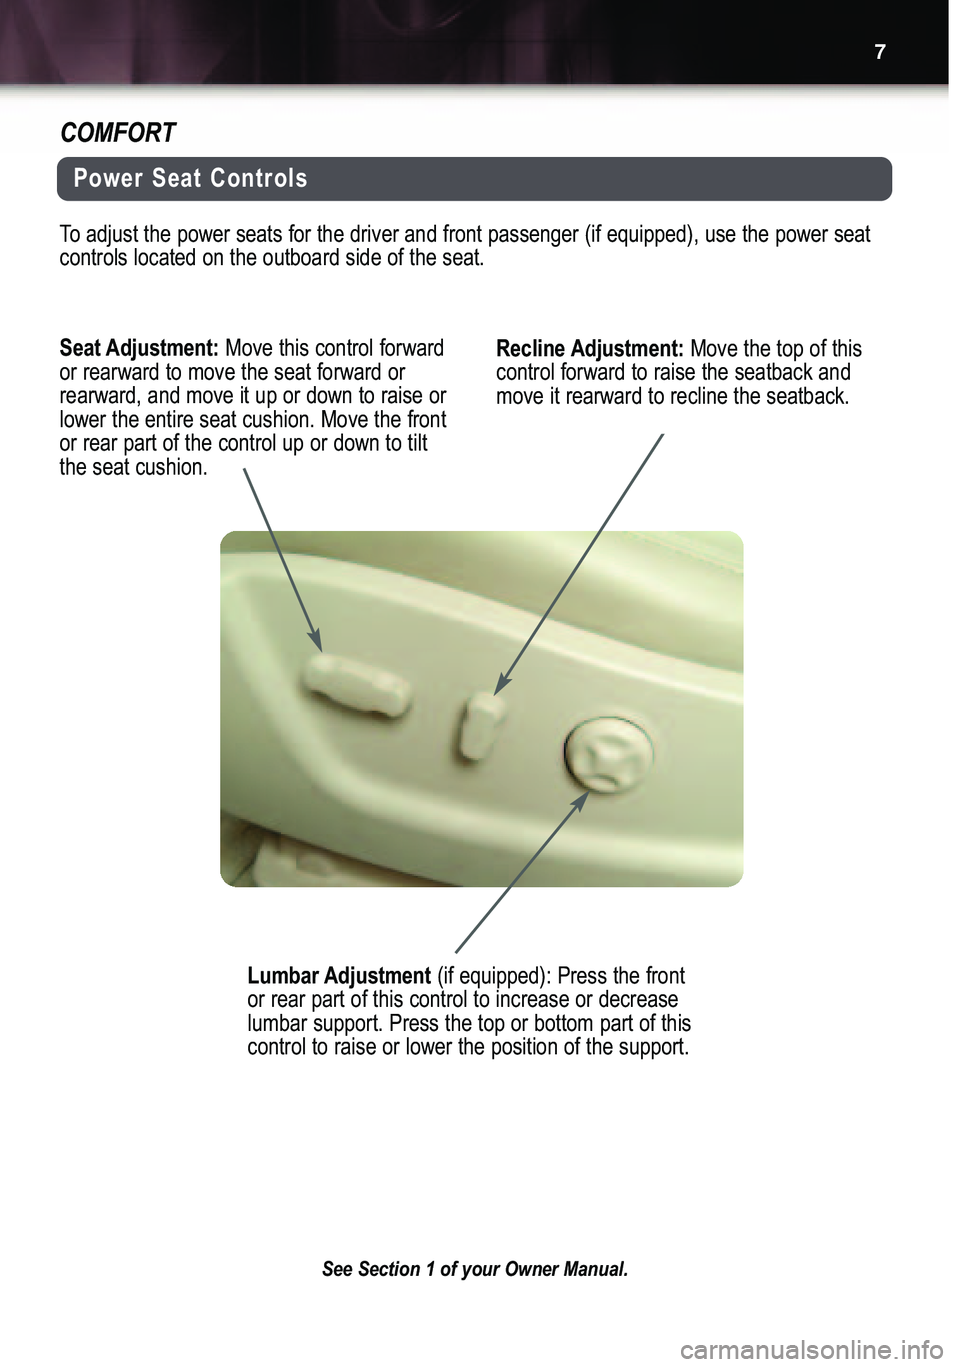 BUICK LUCERNE 2007  Get To Know Guide Seat Adjustment: Move this control forward
or rearward to move the seat forward or rearward, and move it up or down to raise orlower the entire seat cushion. Move the frontor rear part of the control 